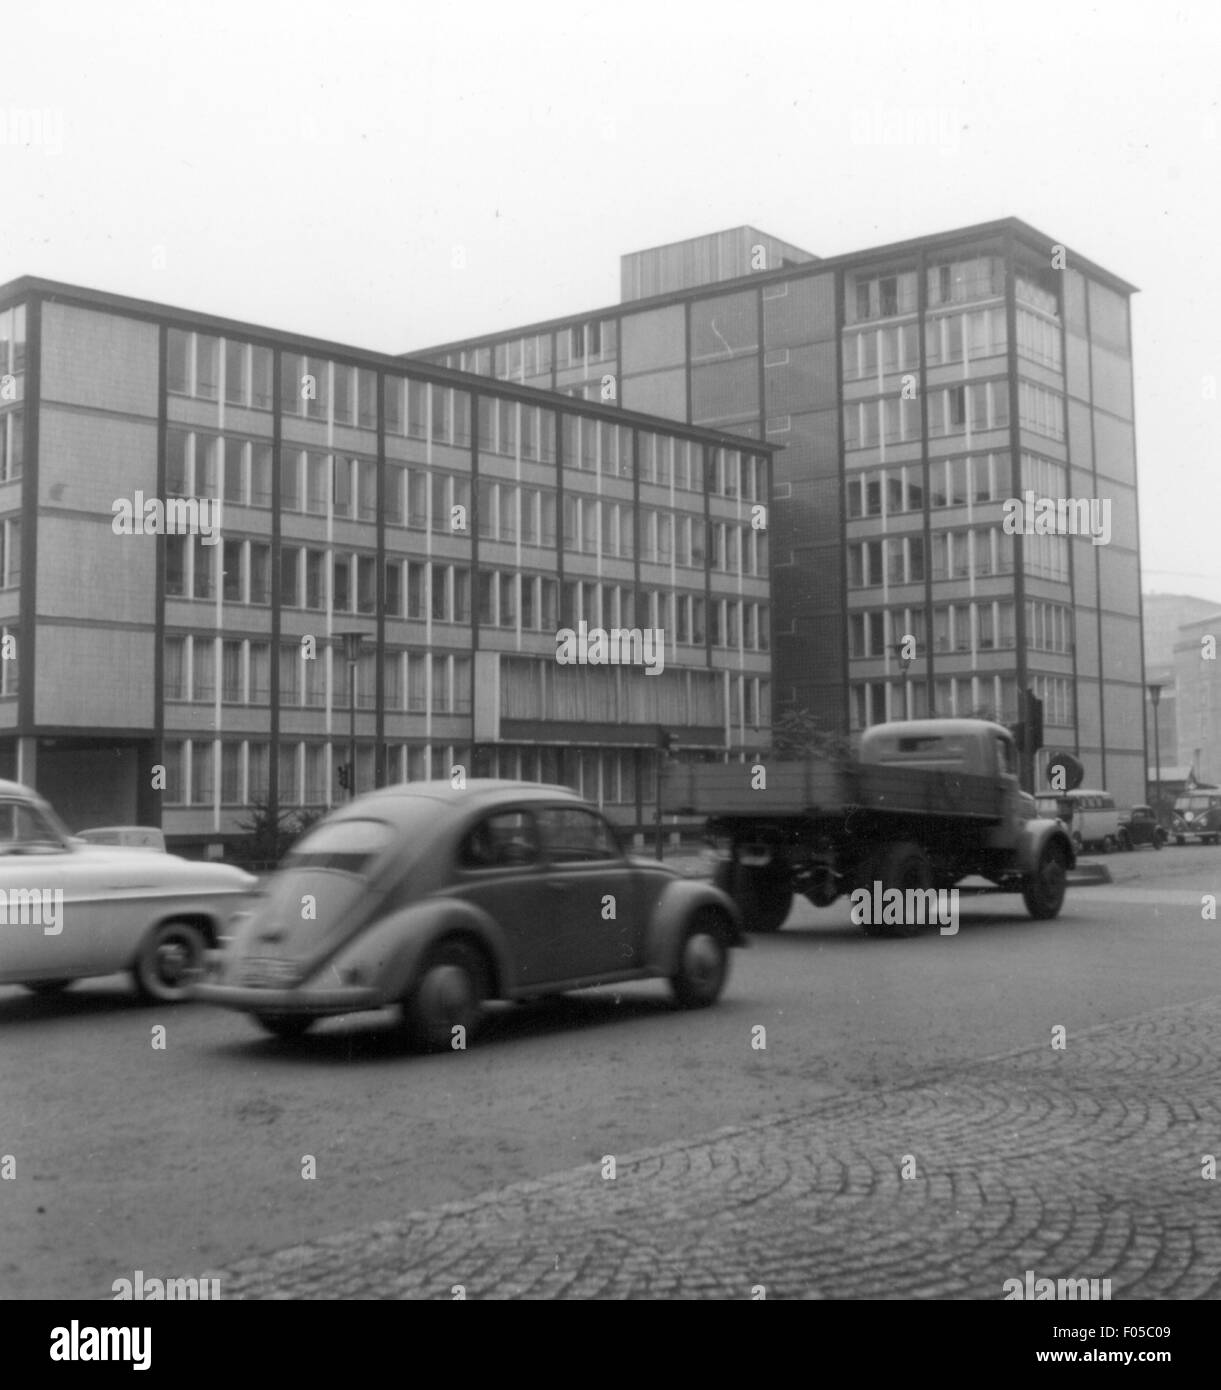 geography / travel,Germany,Frankfurt am Main,building,Bundesrechnungshof(Federal Court of Auditors),built 1951 - 1953,architect: Werner Dierschke and Friedel Steinmeyer,view from the corner Kornmarkt / Berliner Strasse,exterior view,15.10.1956,public building,audit division,Auditor General's office,audit divisions,Auditor General's offices,federal authority,Higher federal authorities,house,houses,multi-storey building,high-rise building,buildings,transport,transportation,road traffic,Volkswagen,VW beetle,lorry,truck,streets,street,Additional-Rights-Clearences-Not Available Stock Photo